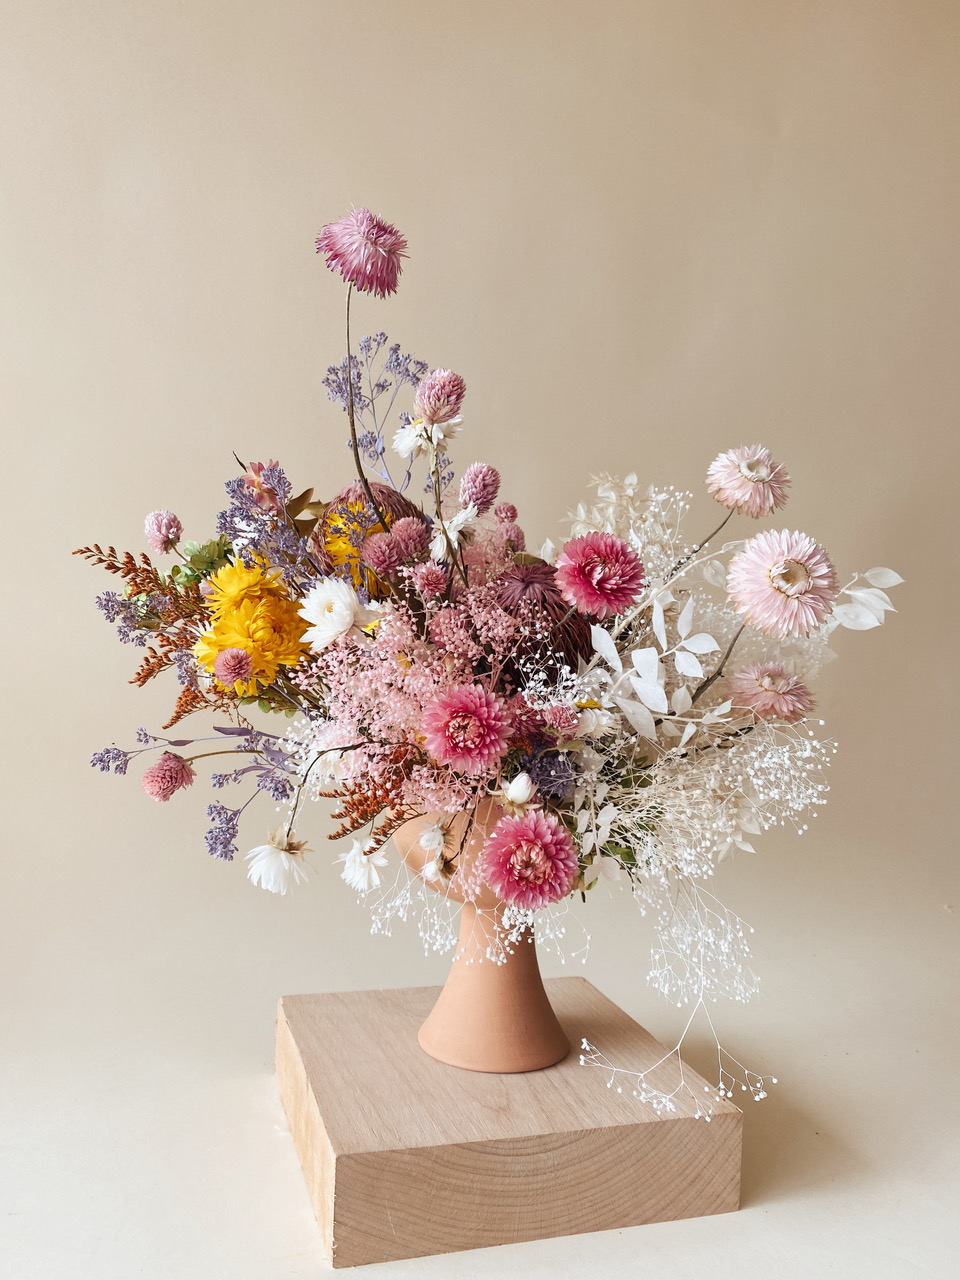 Dried Florals are Trending